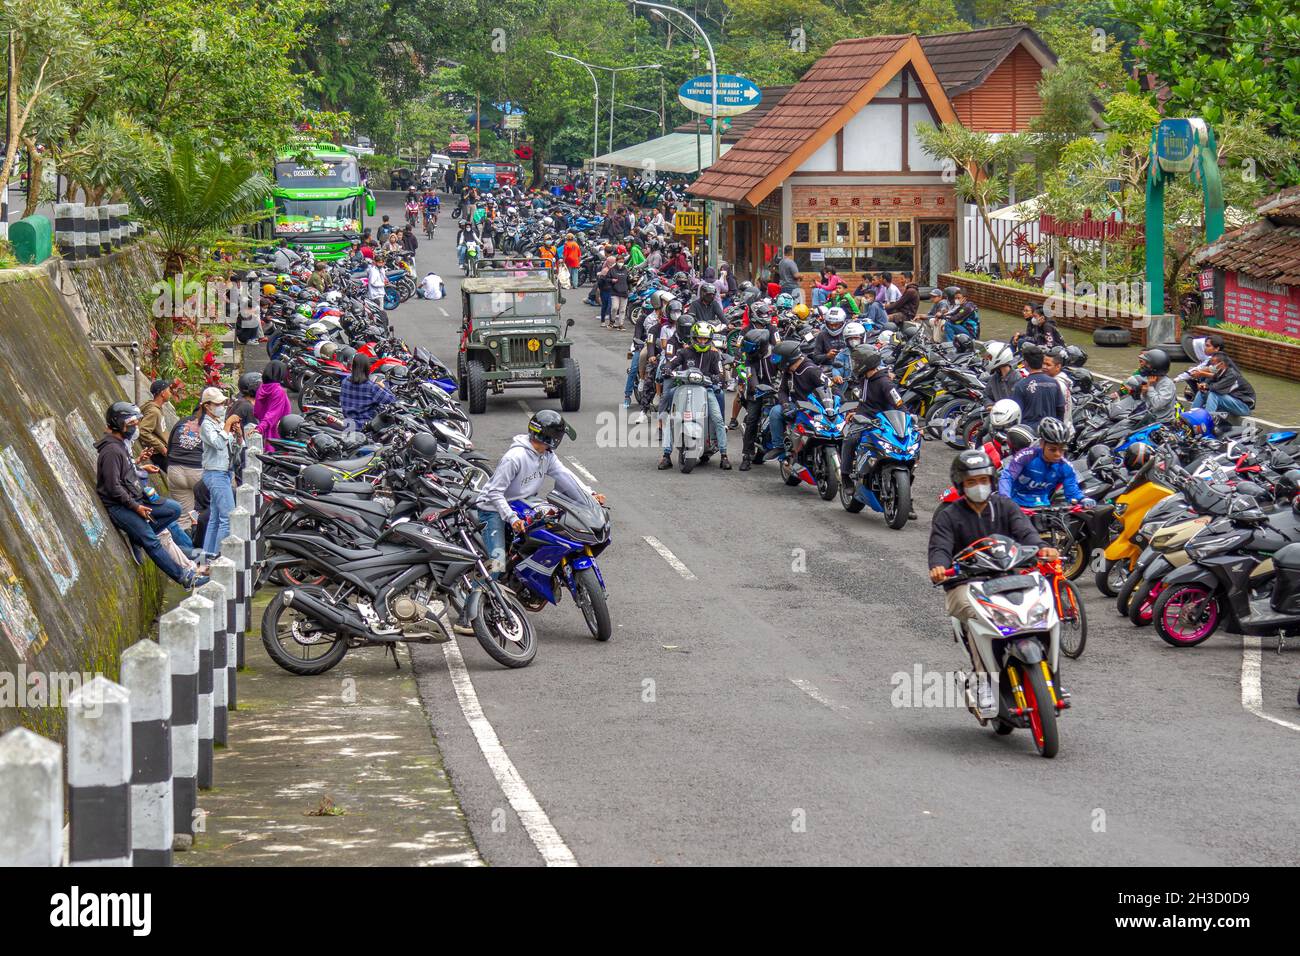 The opening of tourist sites in the midst of the COVID-19 pandemic has attracted many motorcycle clubs to hang out and gather with their friends. Stock Photo